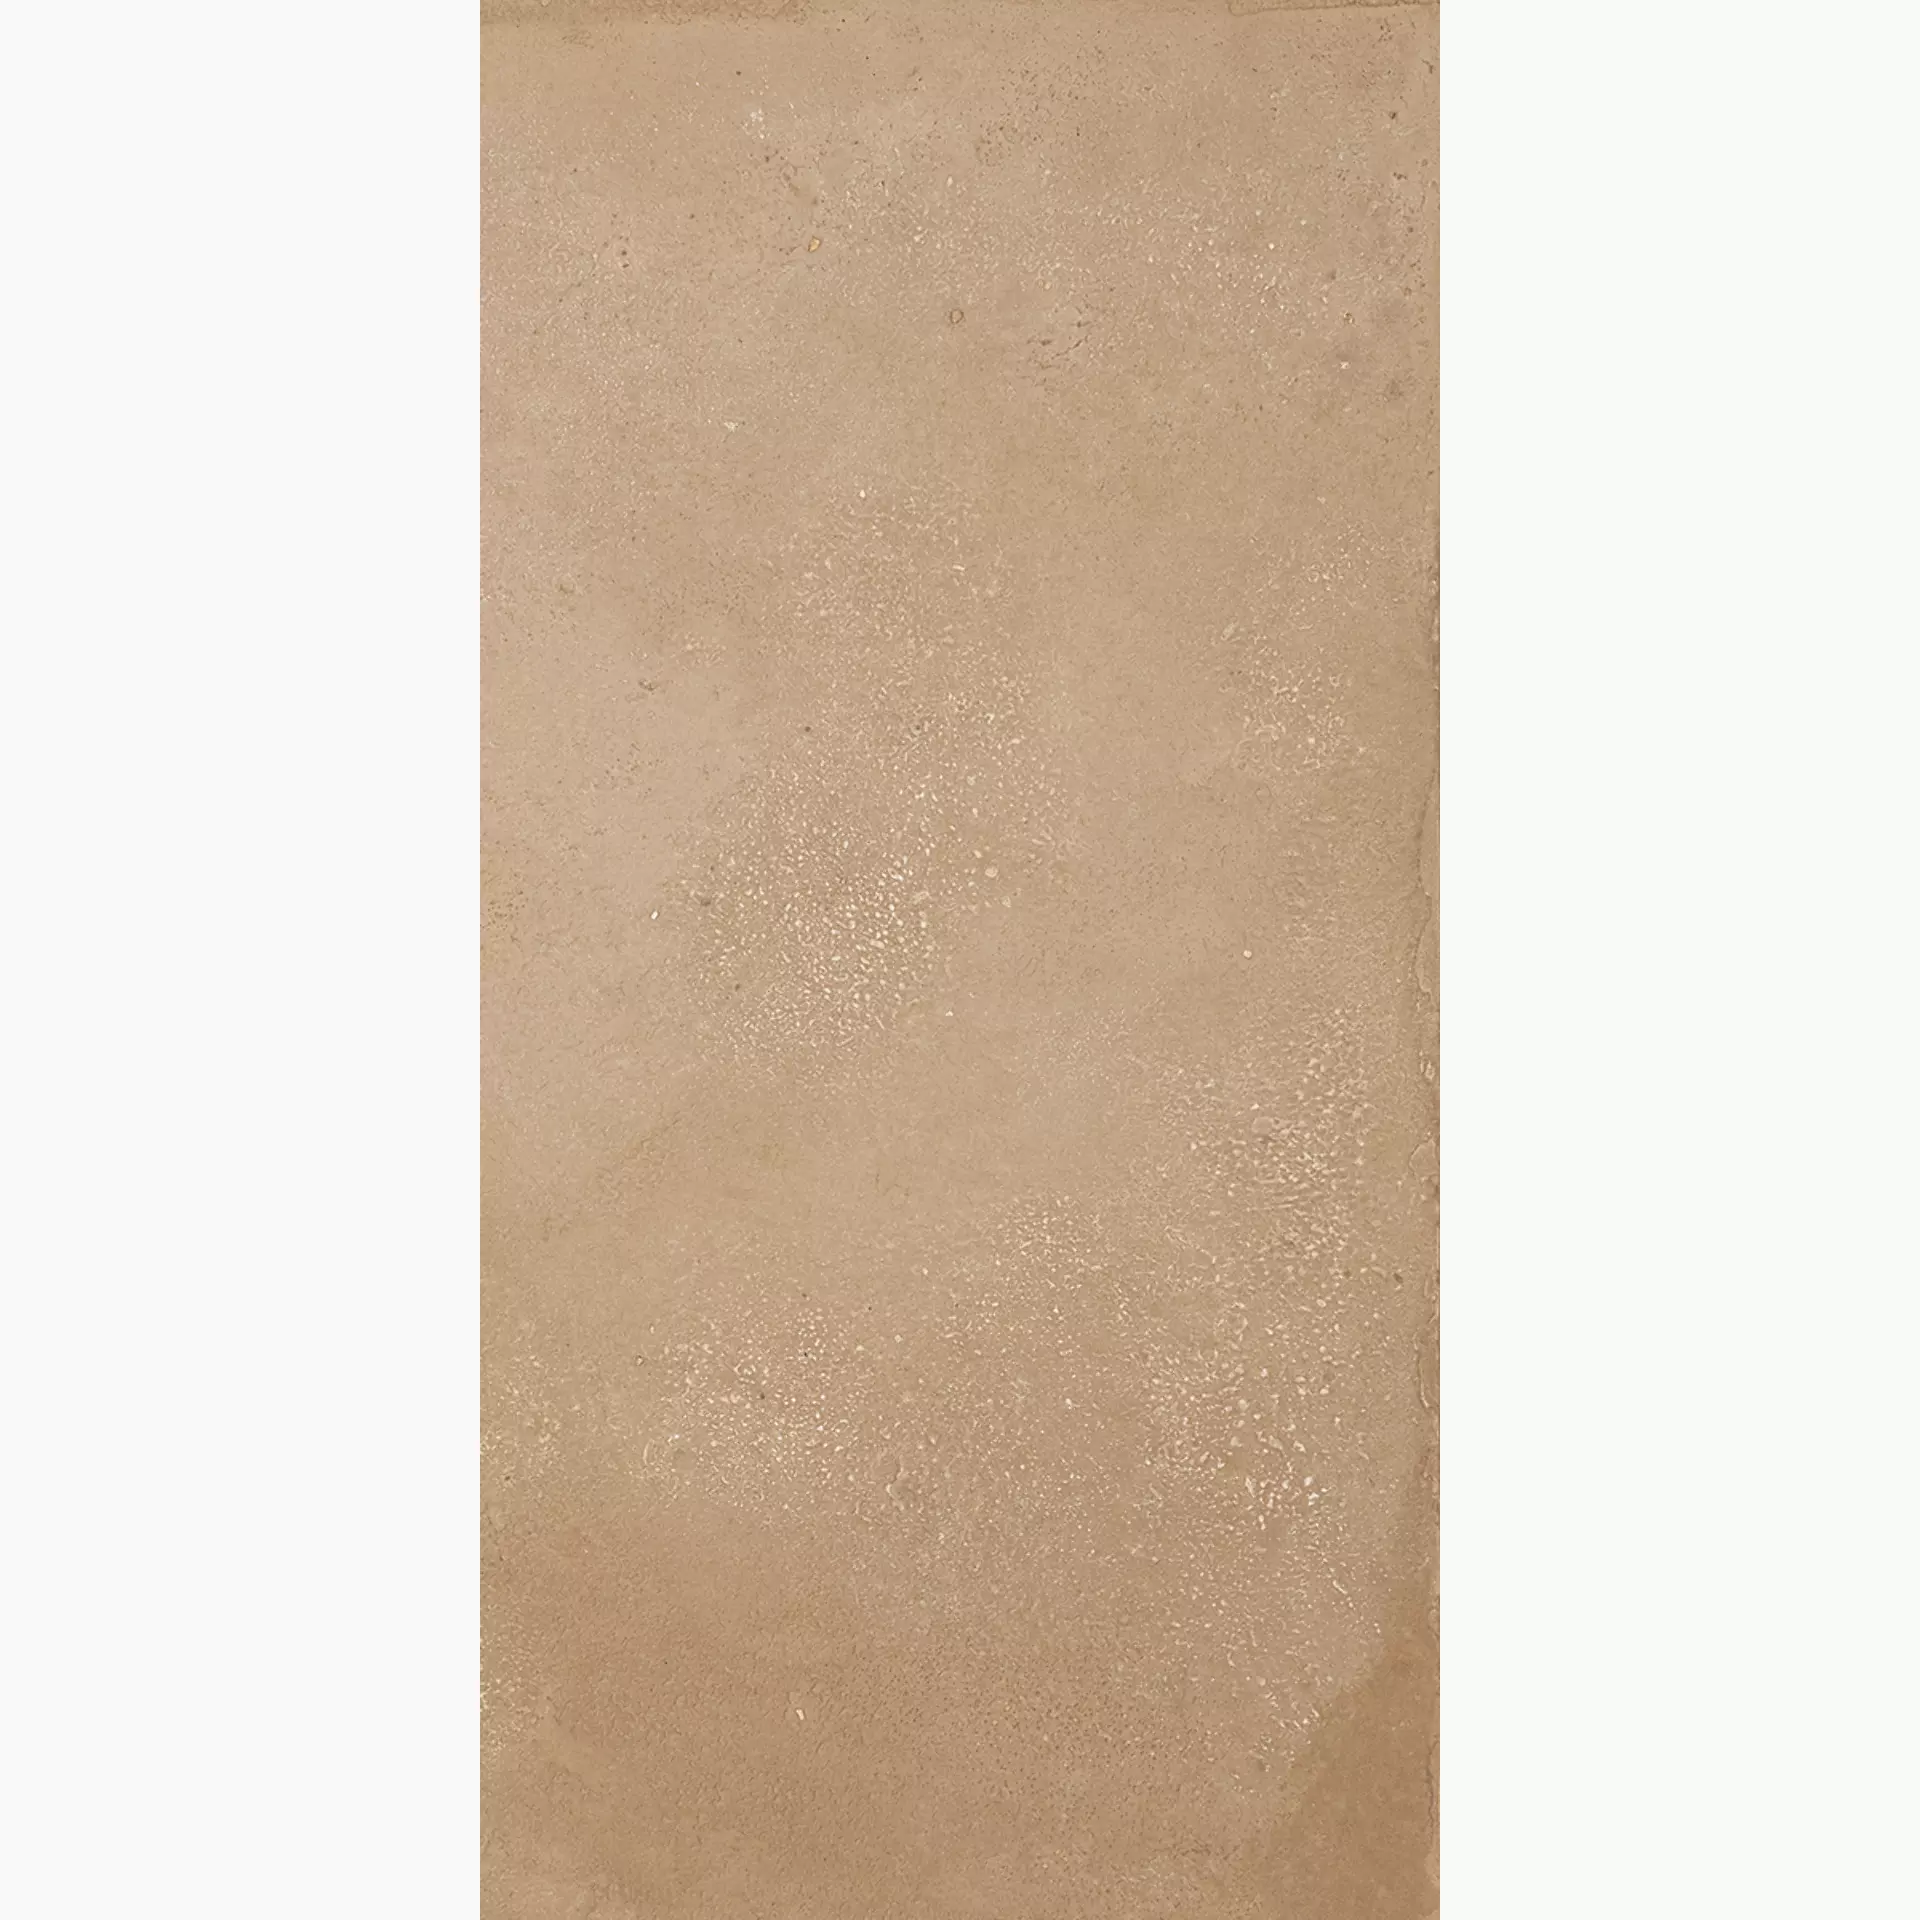 Fondovalle Pigmento Oro Natural PGM021 60x120cm rectified 6,5mm